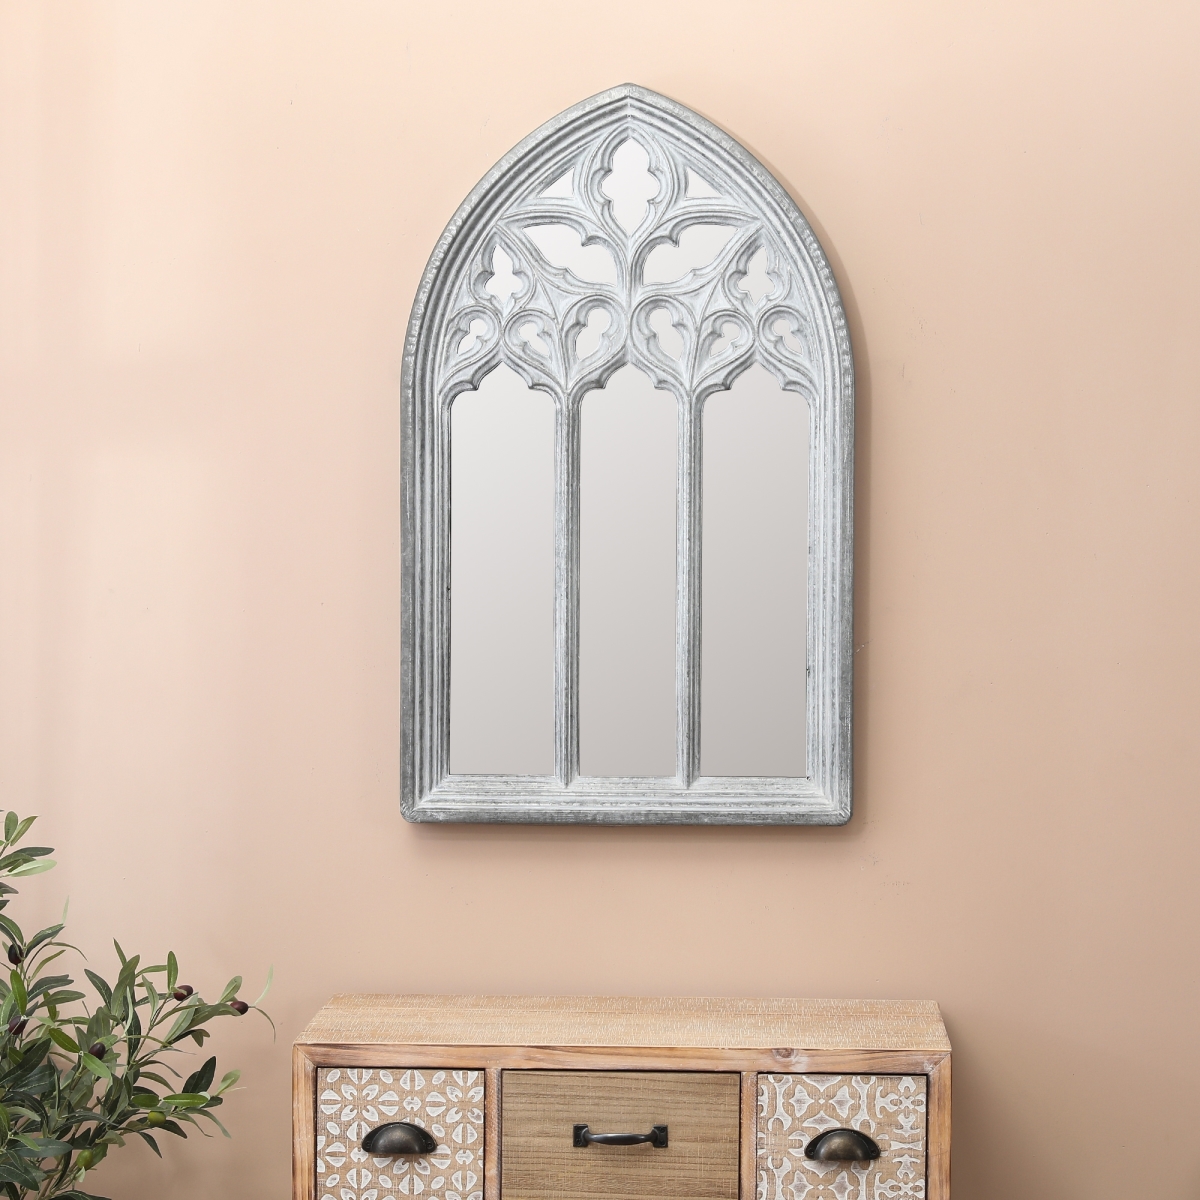 Wha809 Metal Arched Window Wall Mirror